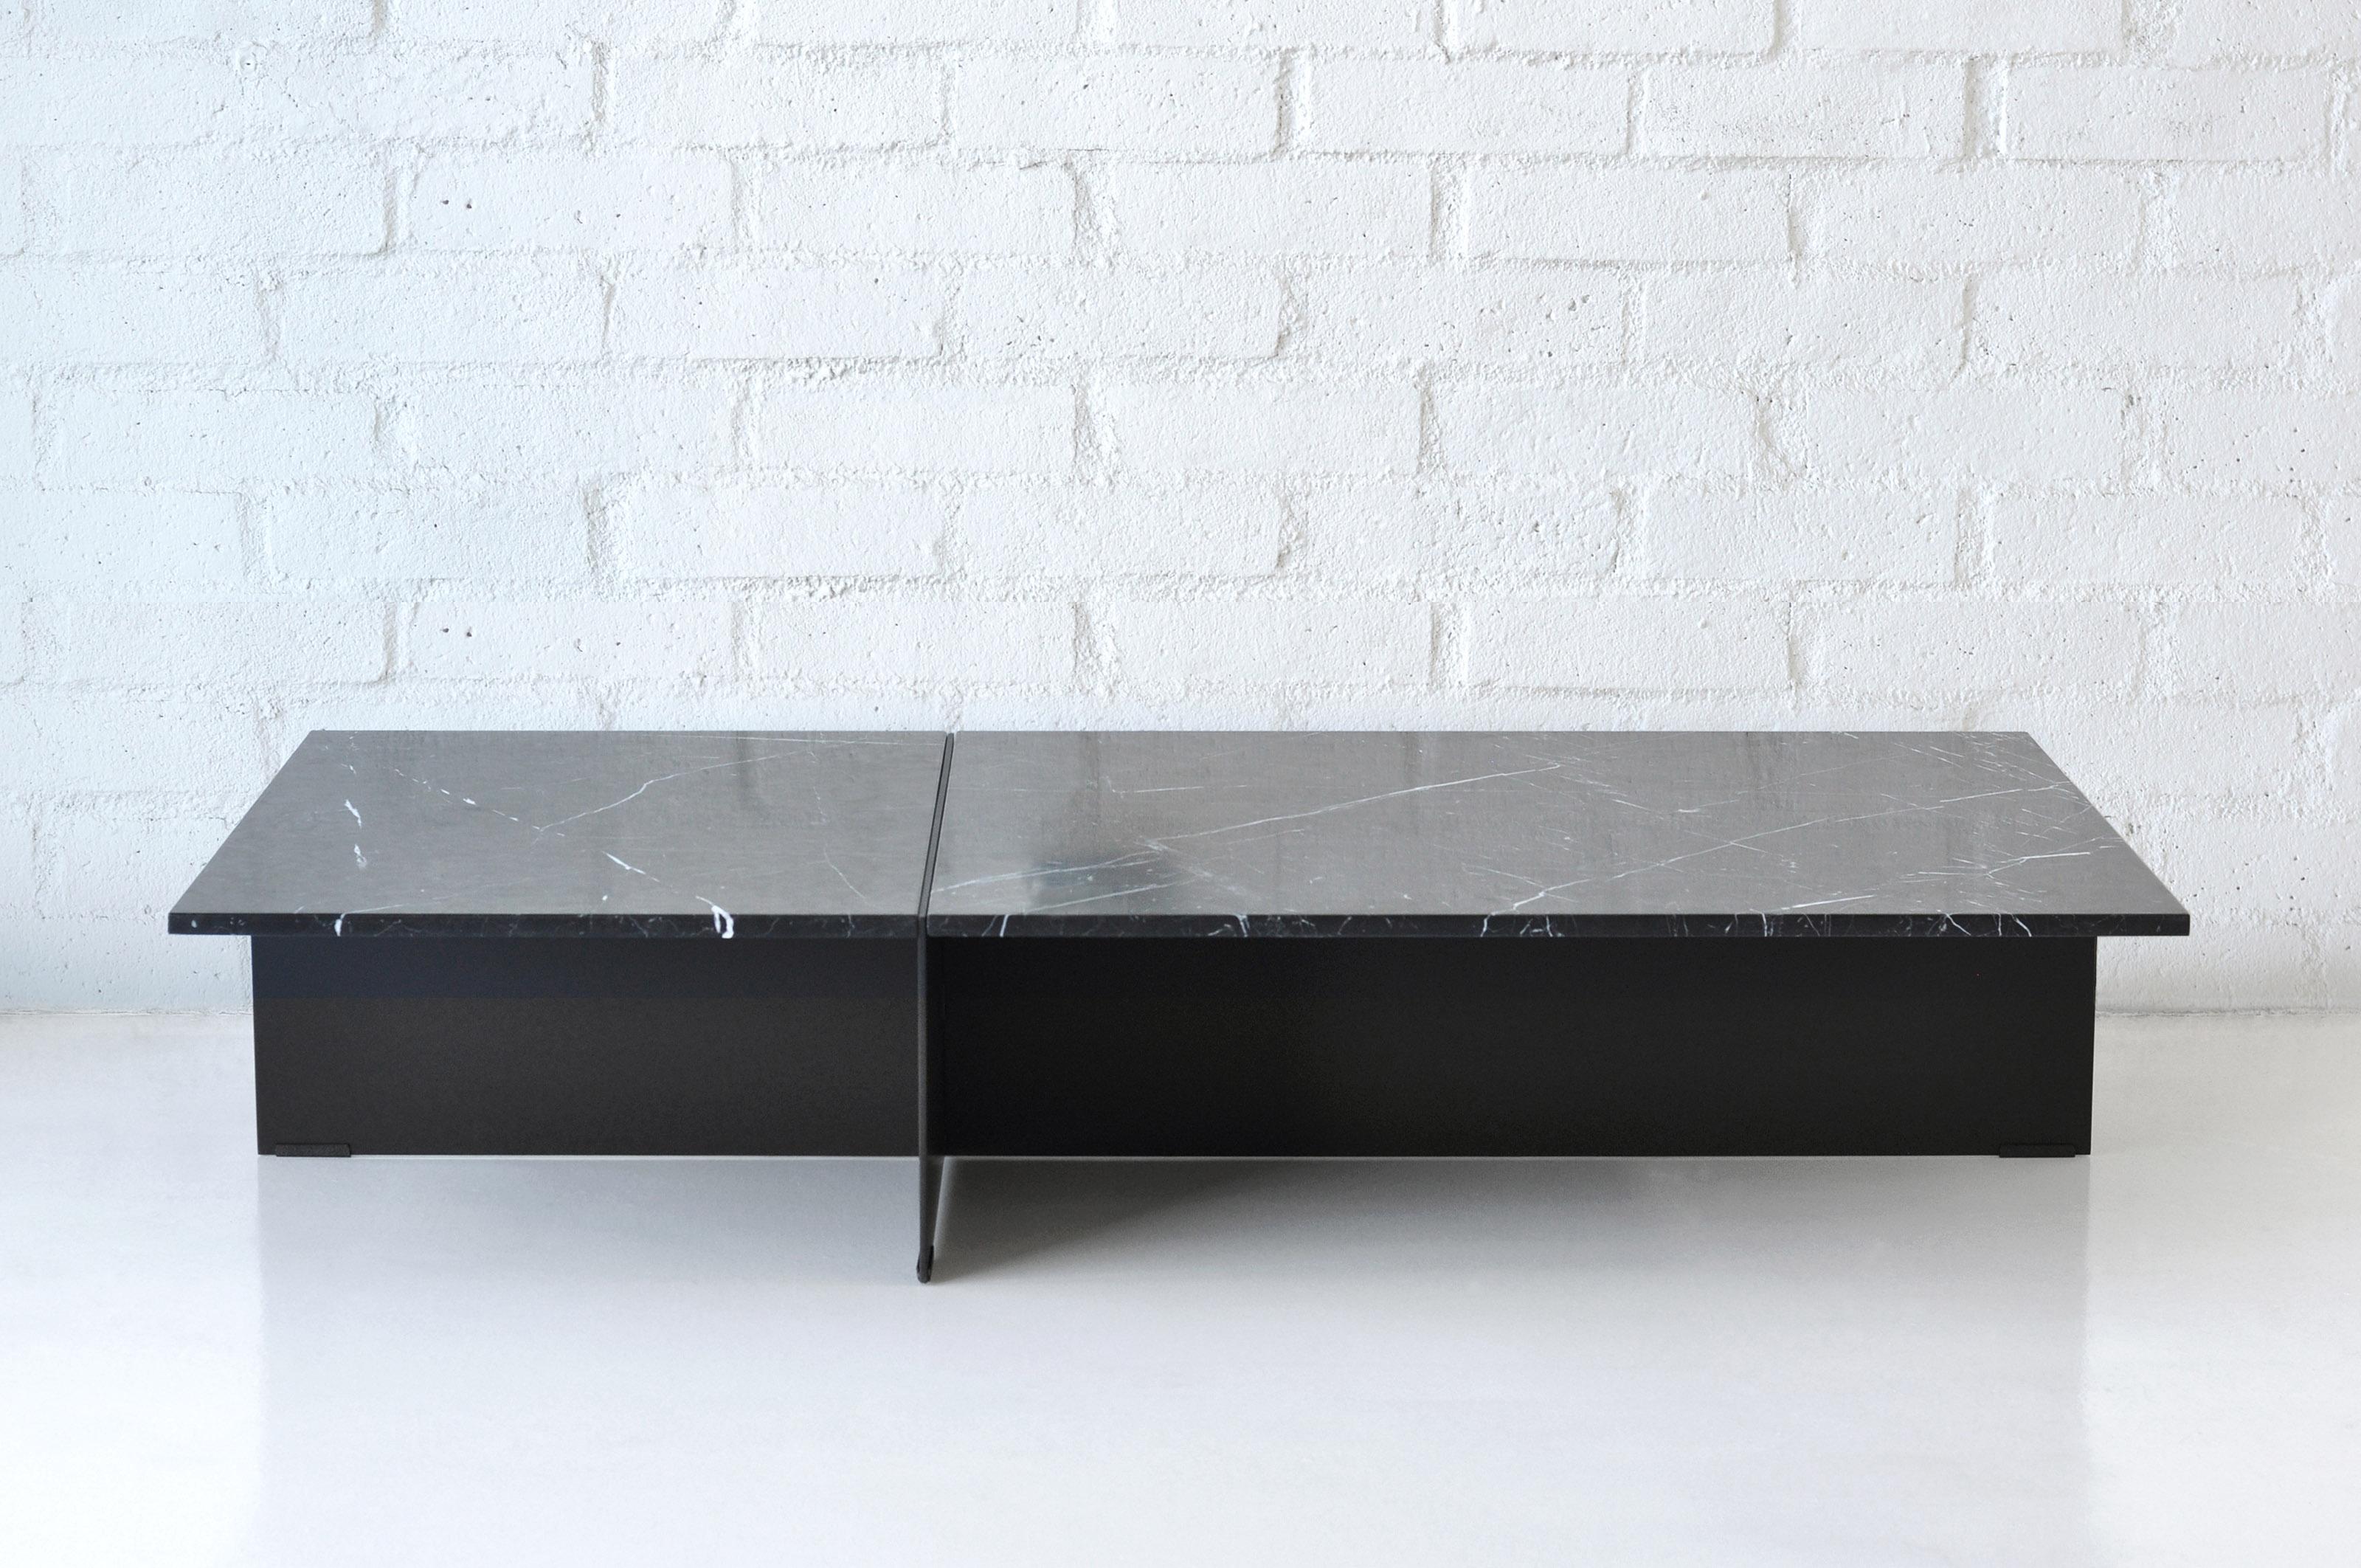 Division Rectangular Coffee Table by Phase Design
Dimensions: D 81,3 x W 162,6 x H 30,5 cm. 
Materials: Powder-coated solid steel and negro marquina marble.

Solid steel sheet available in a flat black or white powder coat finish. Powder coat